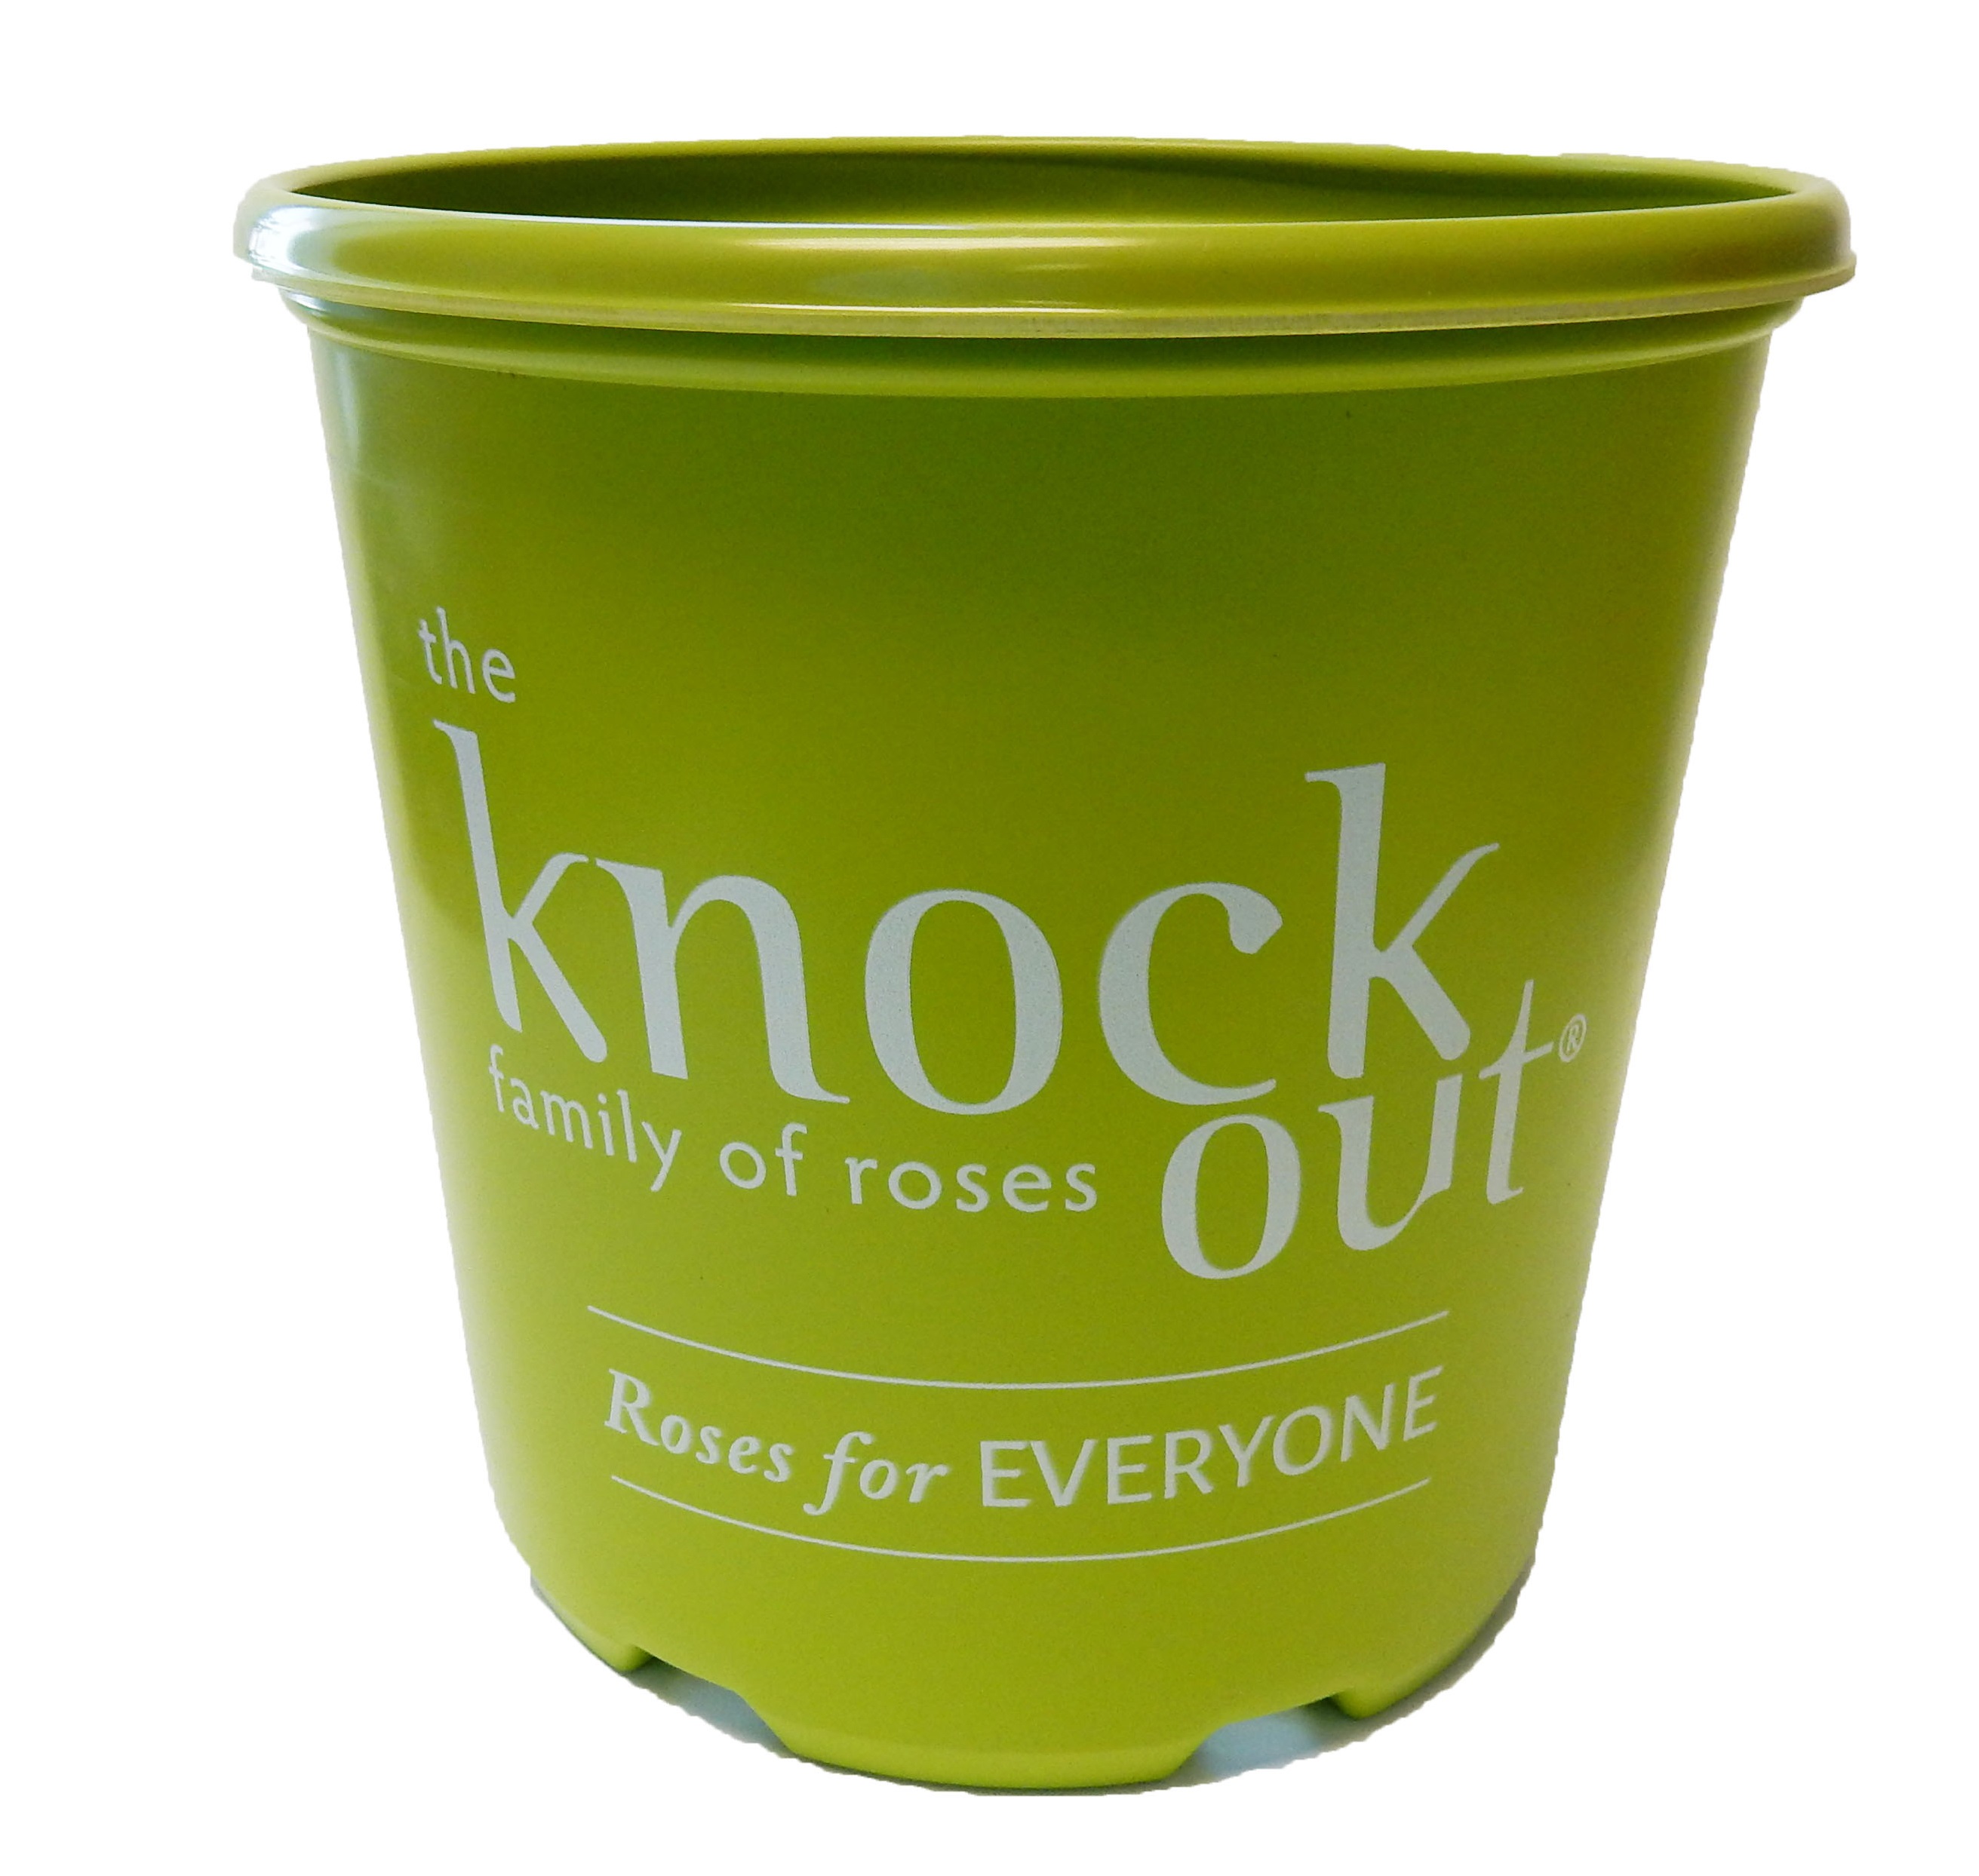 3.00 Gallon Knockout Rose Thermoformed Nursery Pot - 44 per case - Nursery Containers